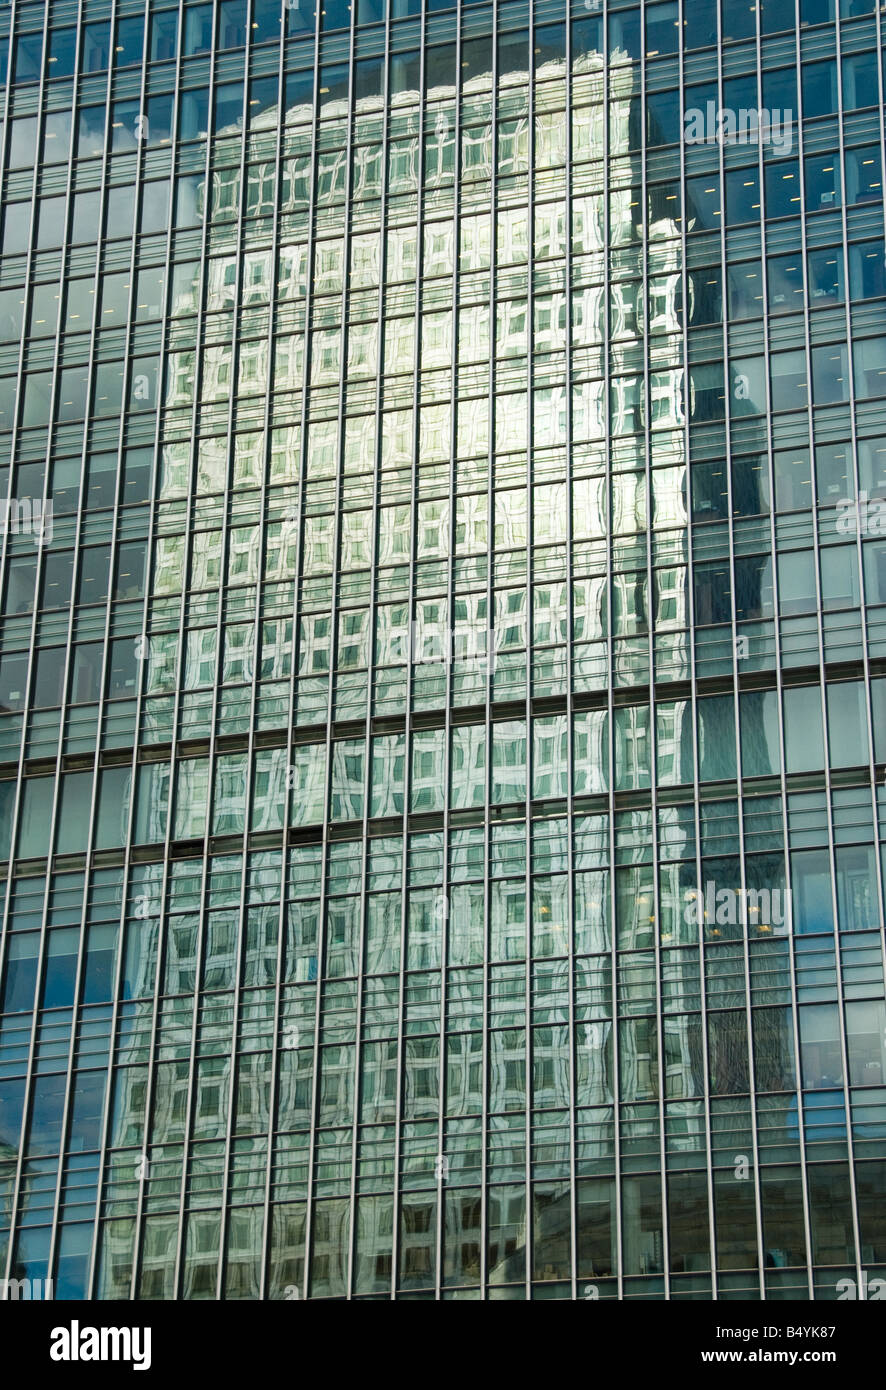 One Canada Square in Canary Wharf London Stock Photo